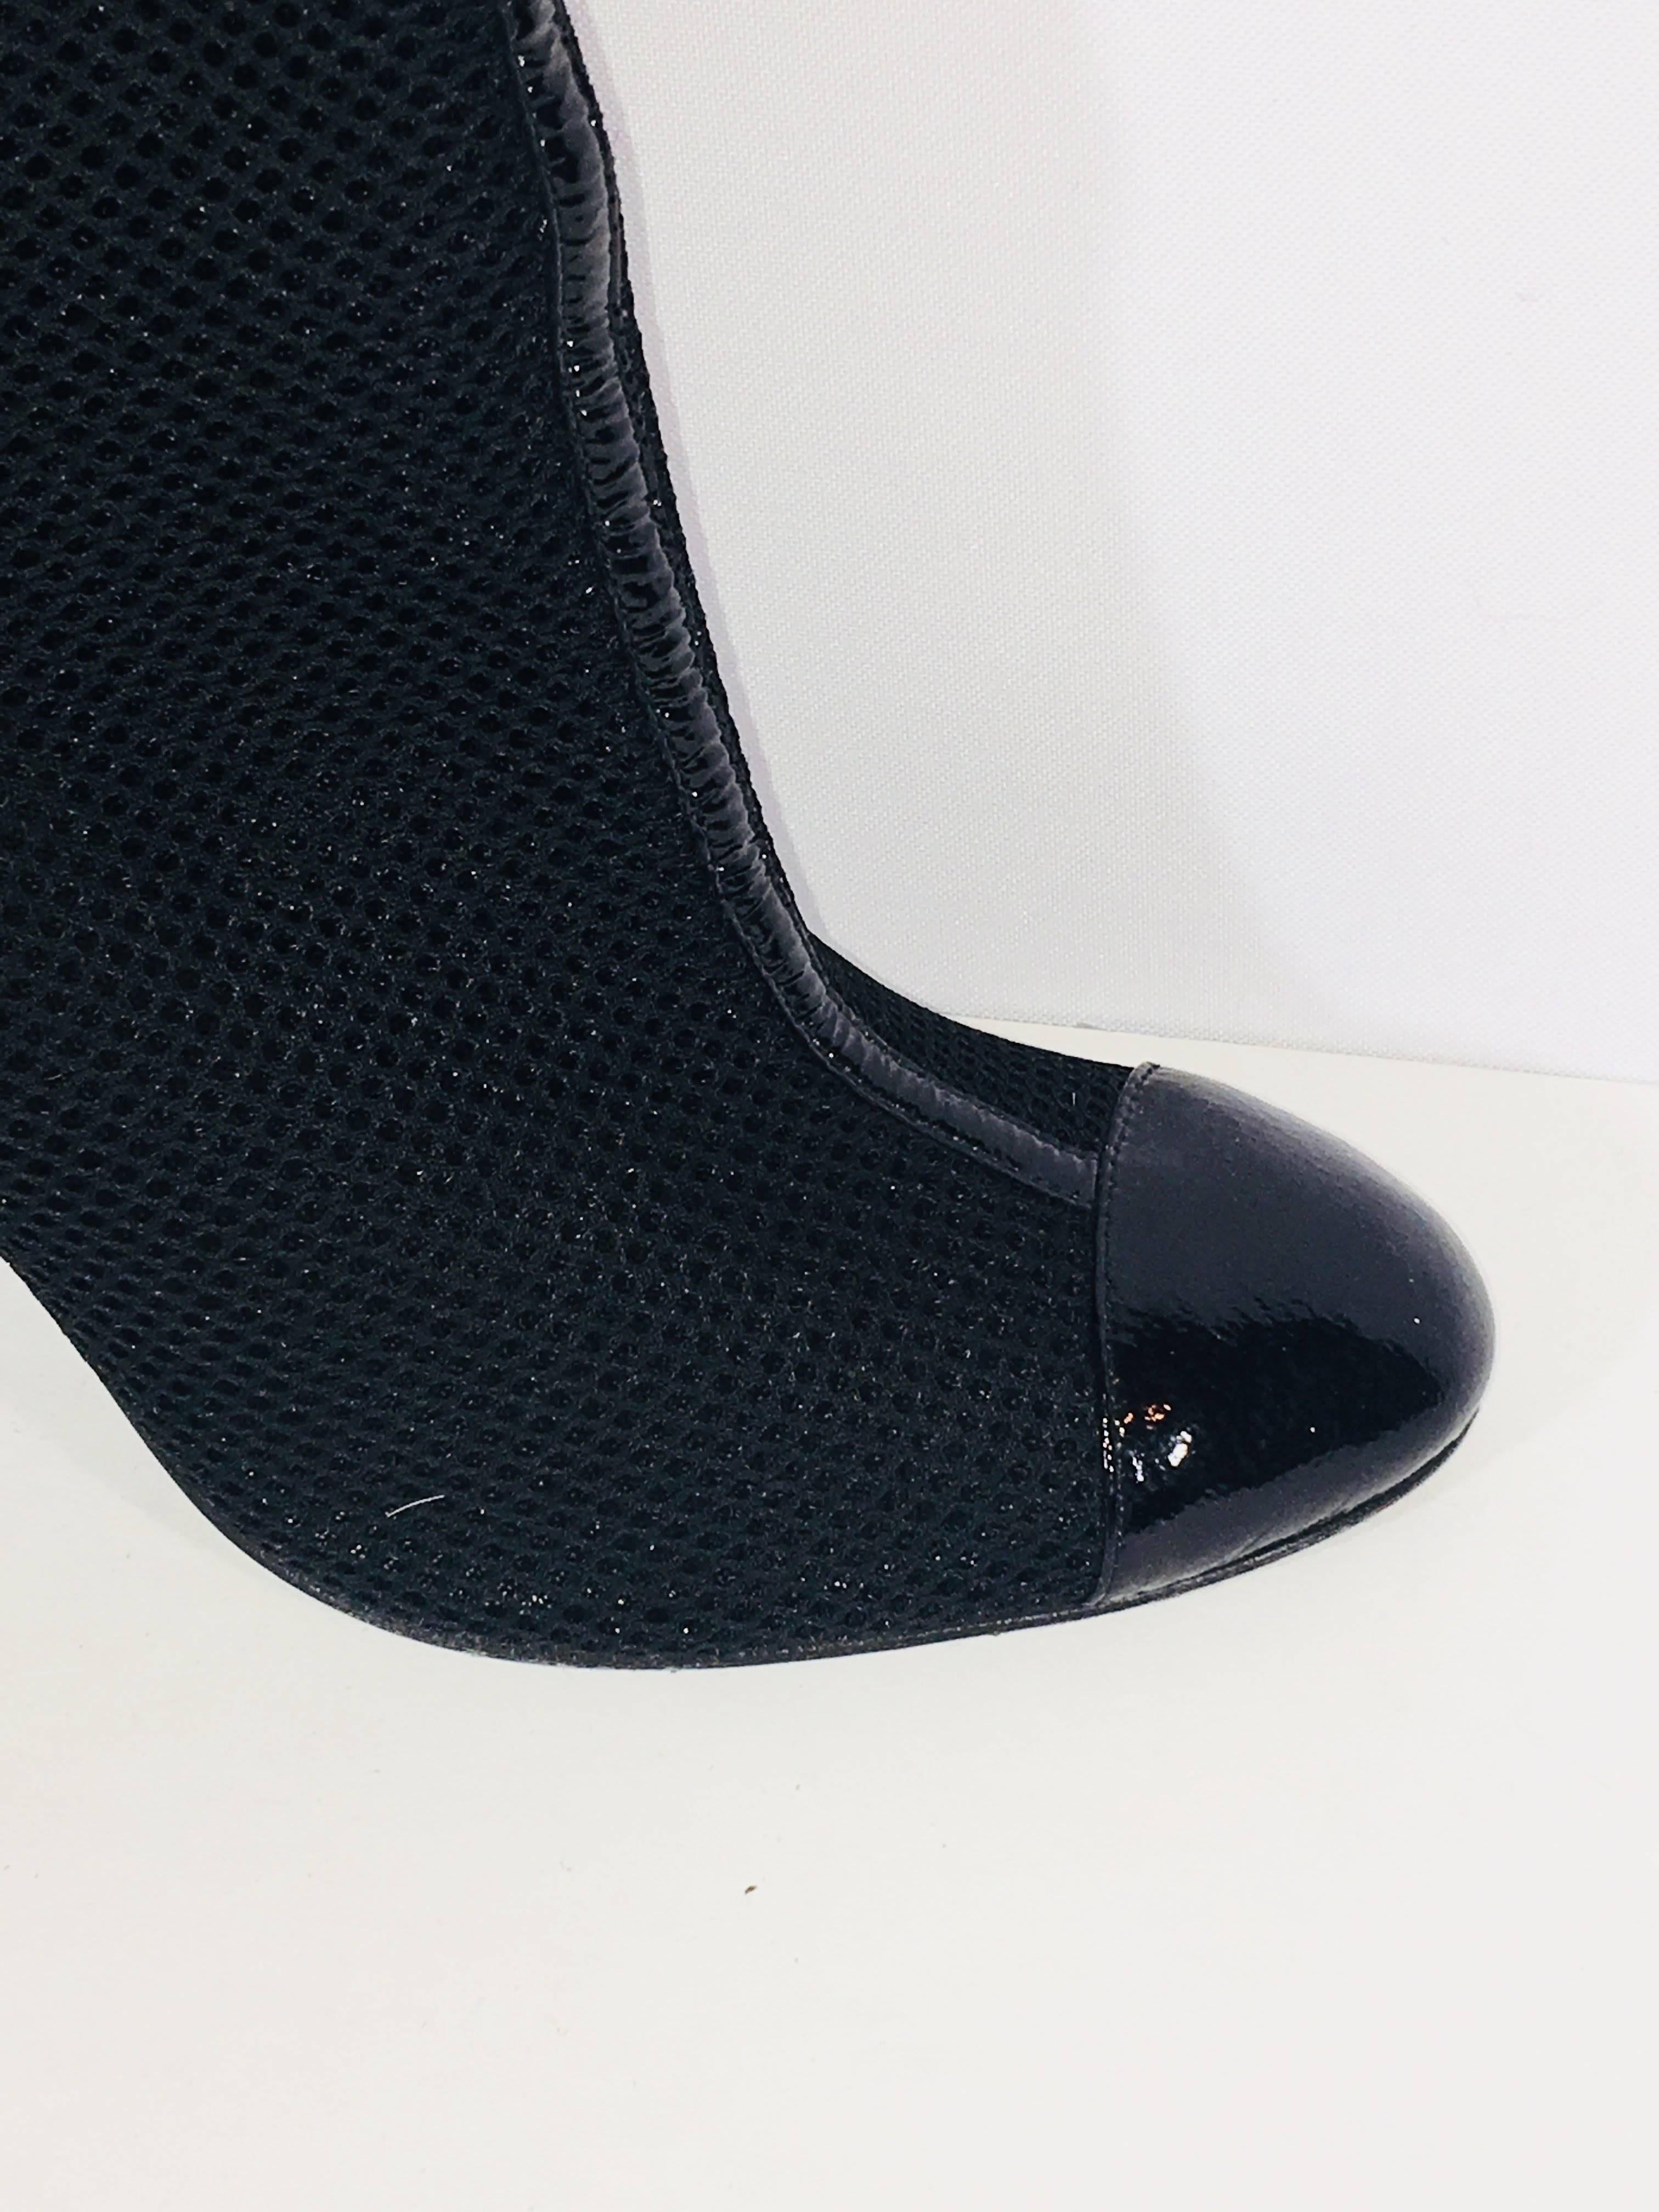 Chanel Round Toe Bootie with Patent Leather Panels and Perforated Mesh Body and Zipper Back.